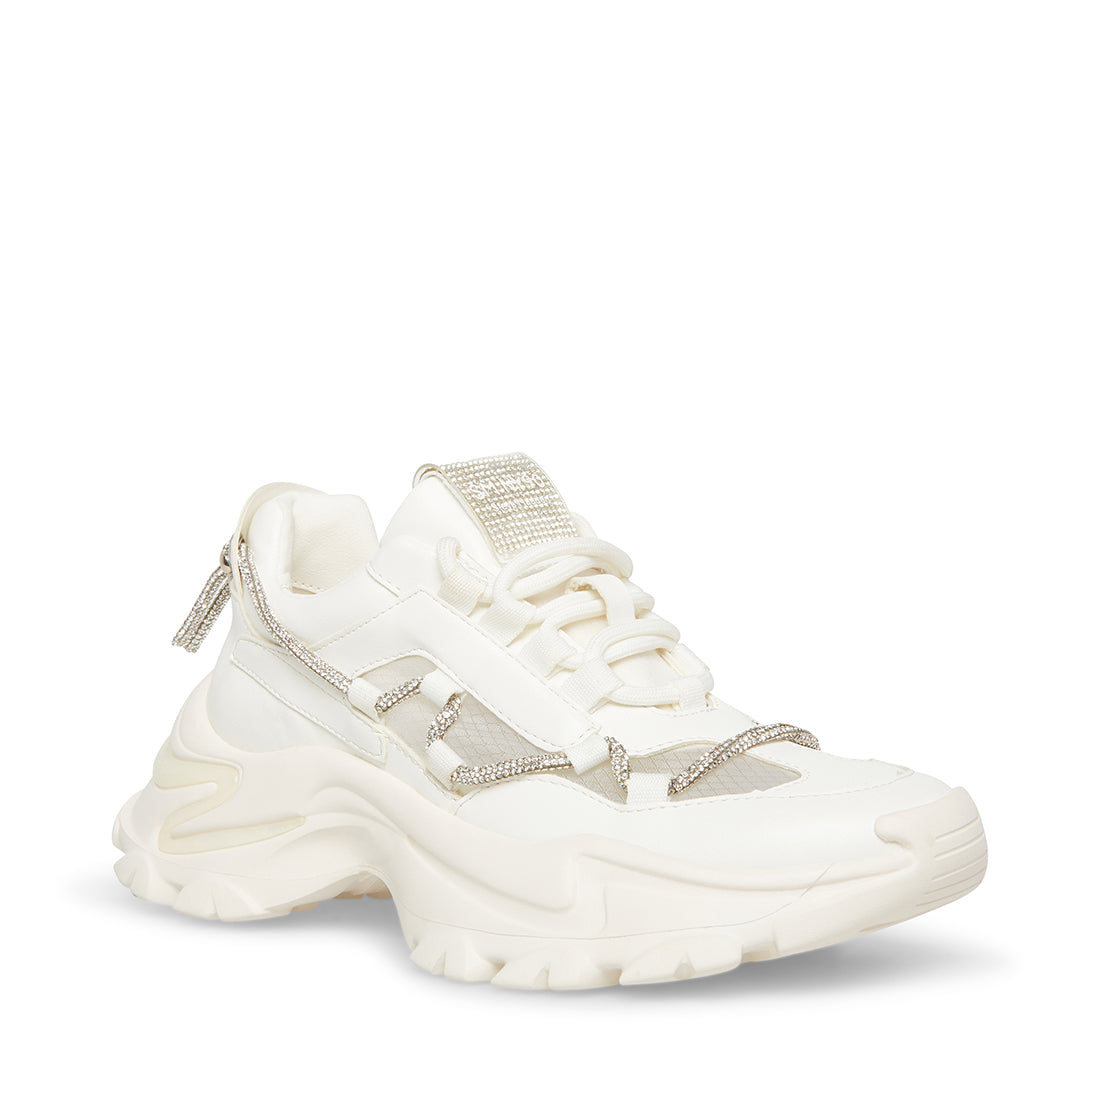 Miracles Sneaker White/Silver- Hover Image